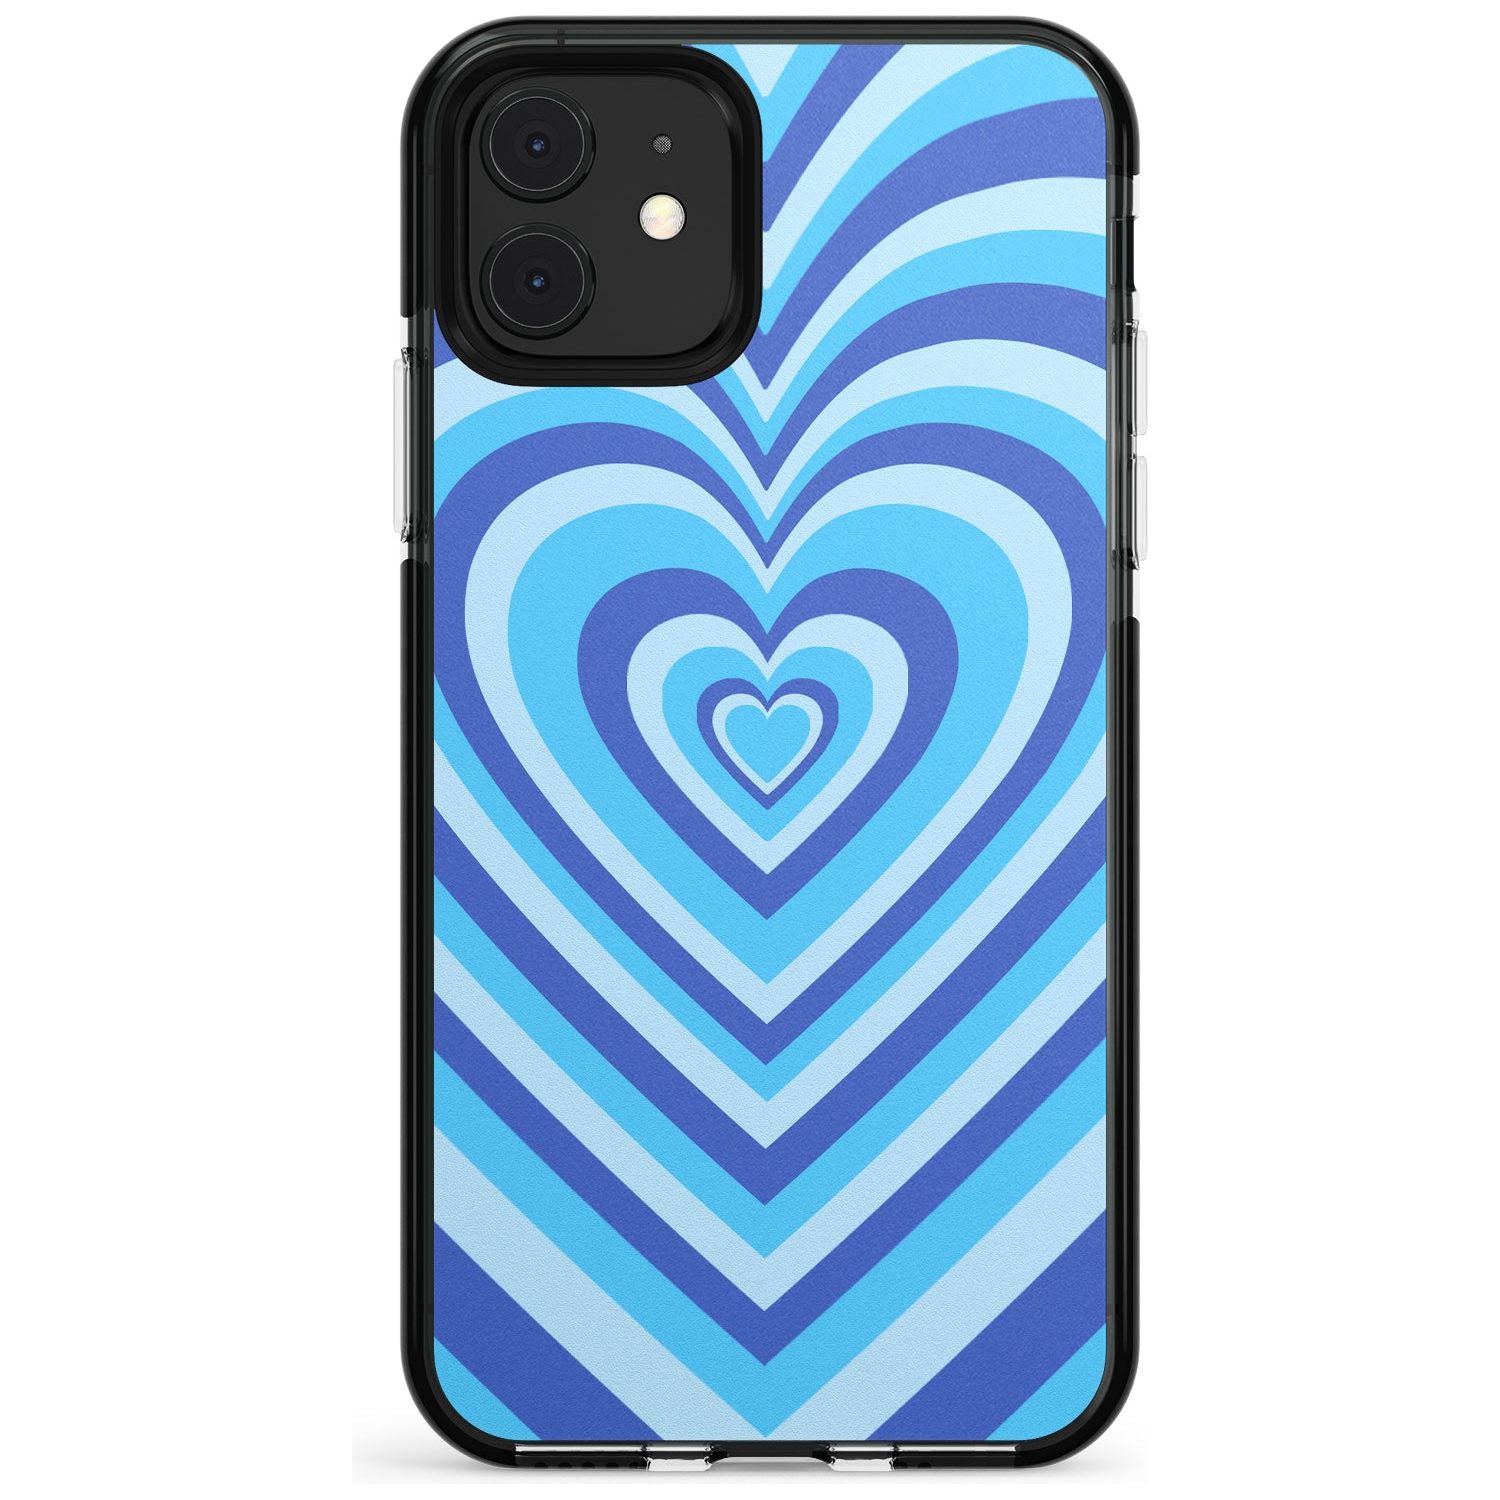 Blue Heart Illusion Black Impact Phone Case for iPhone 11 Pro Max